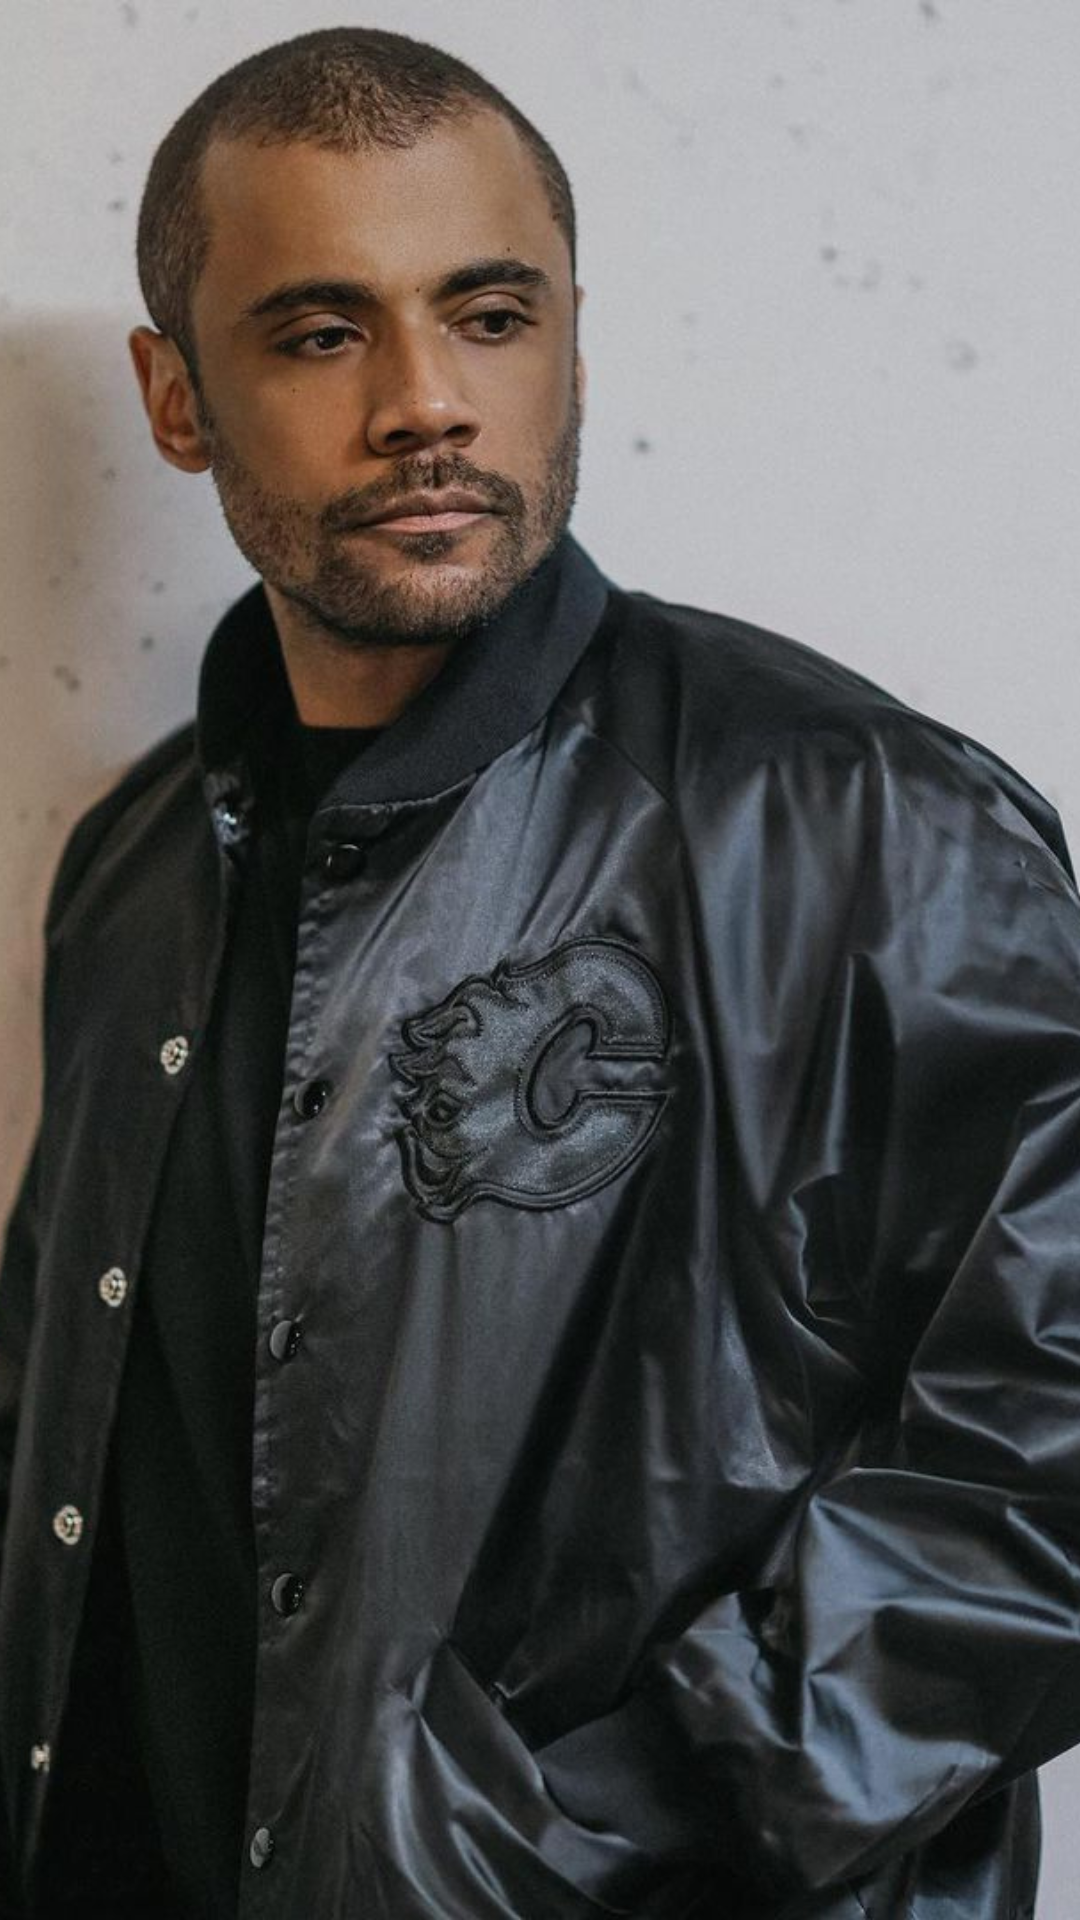 image of a man wearing a black bomber jacket iwth the calgary flames logo on the front